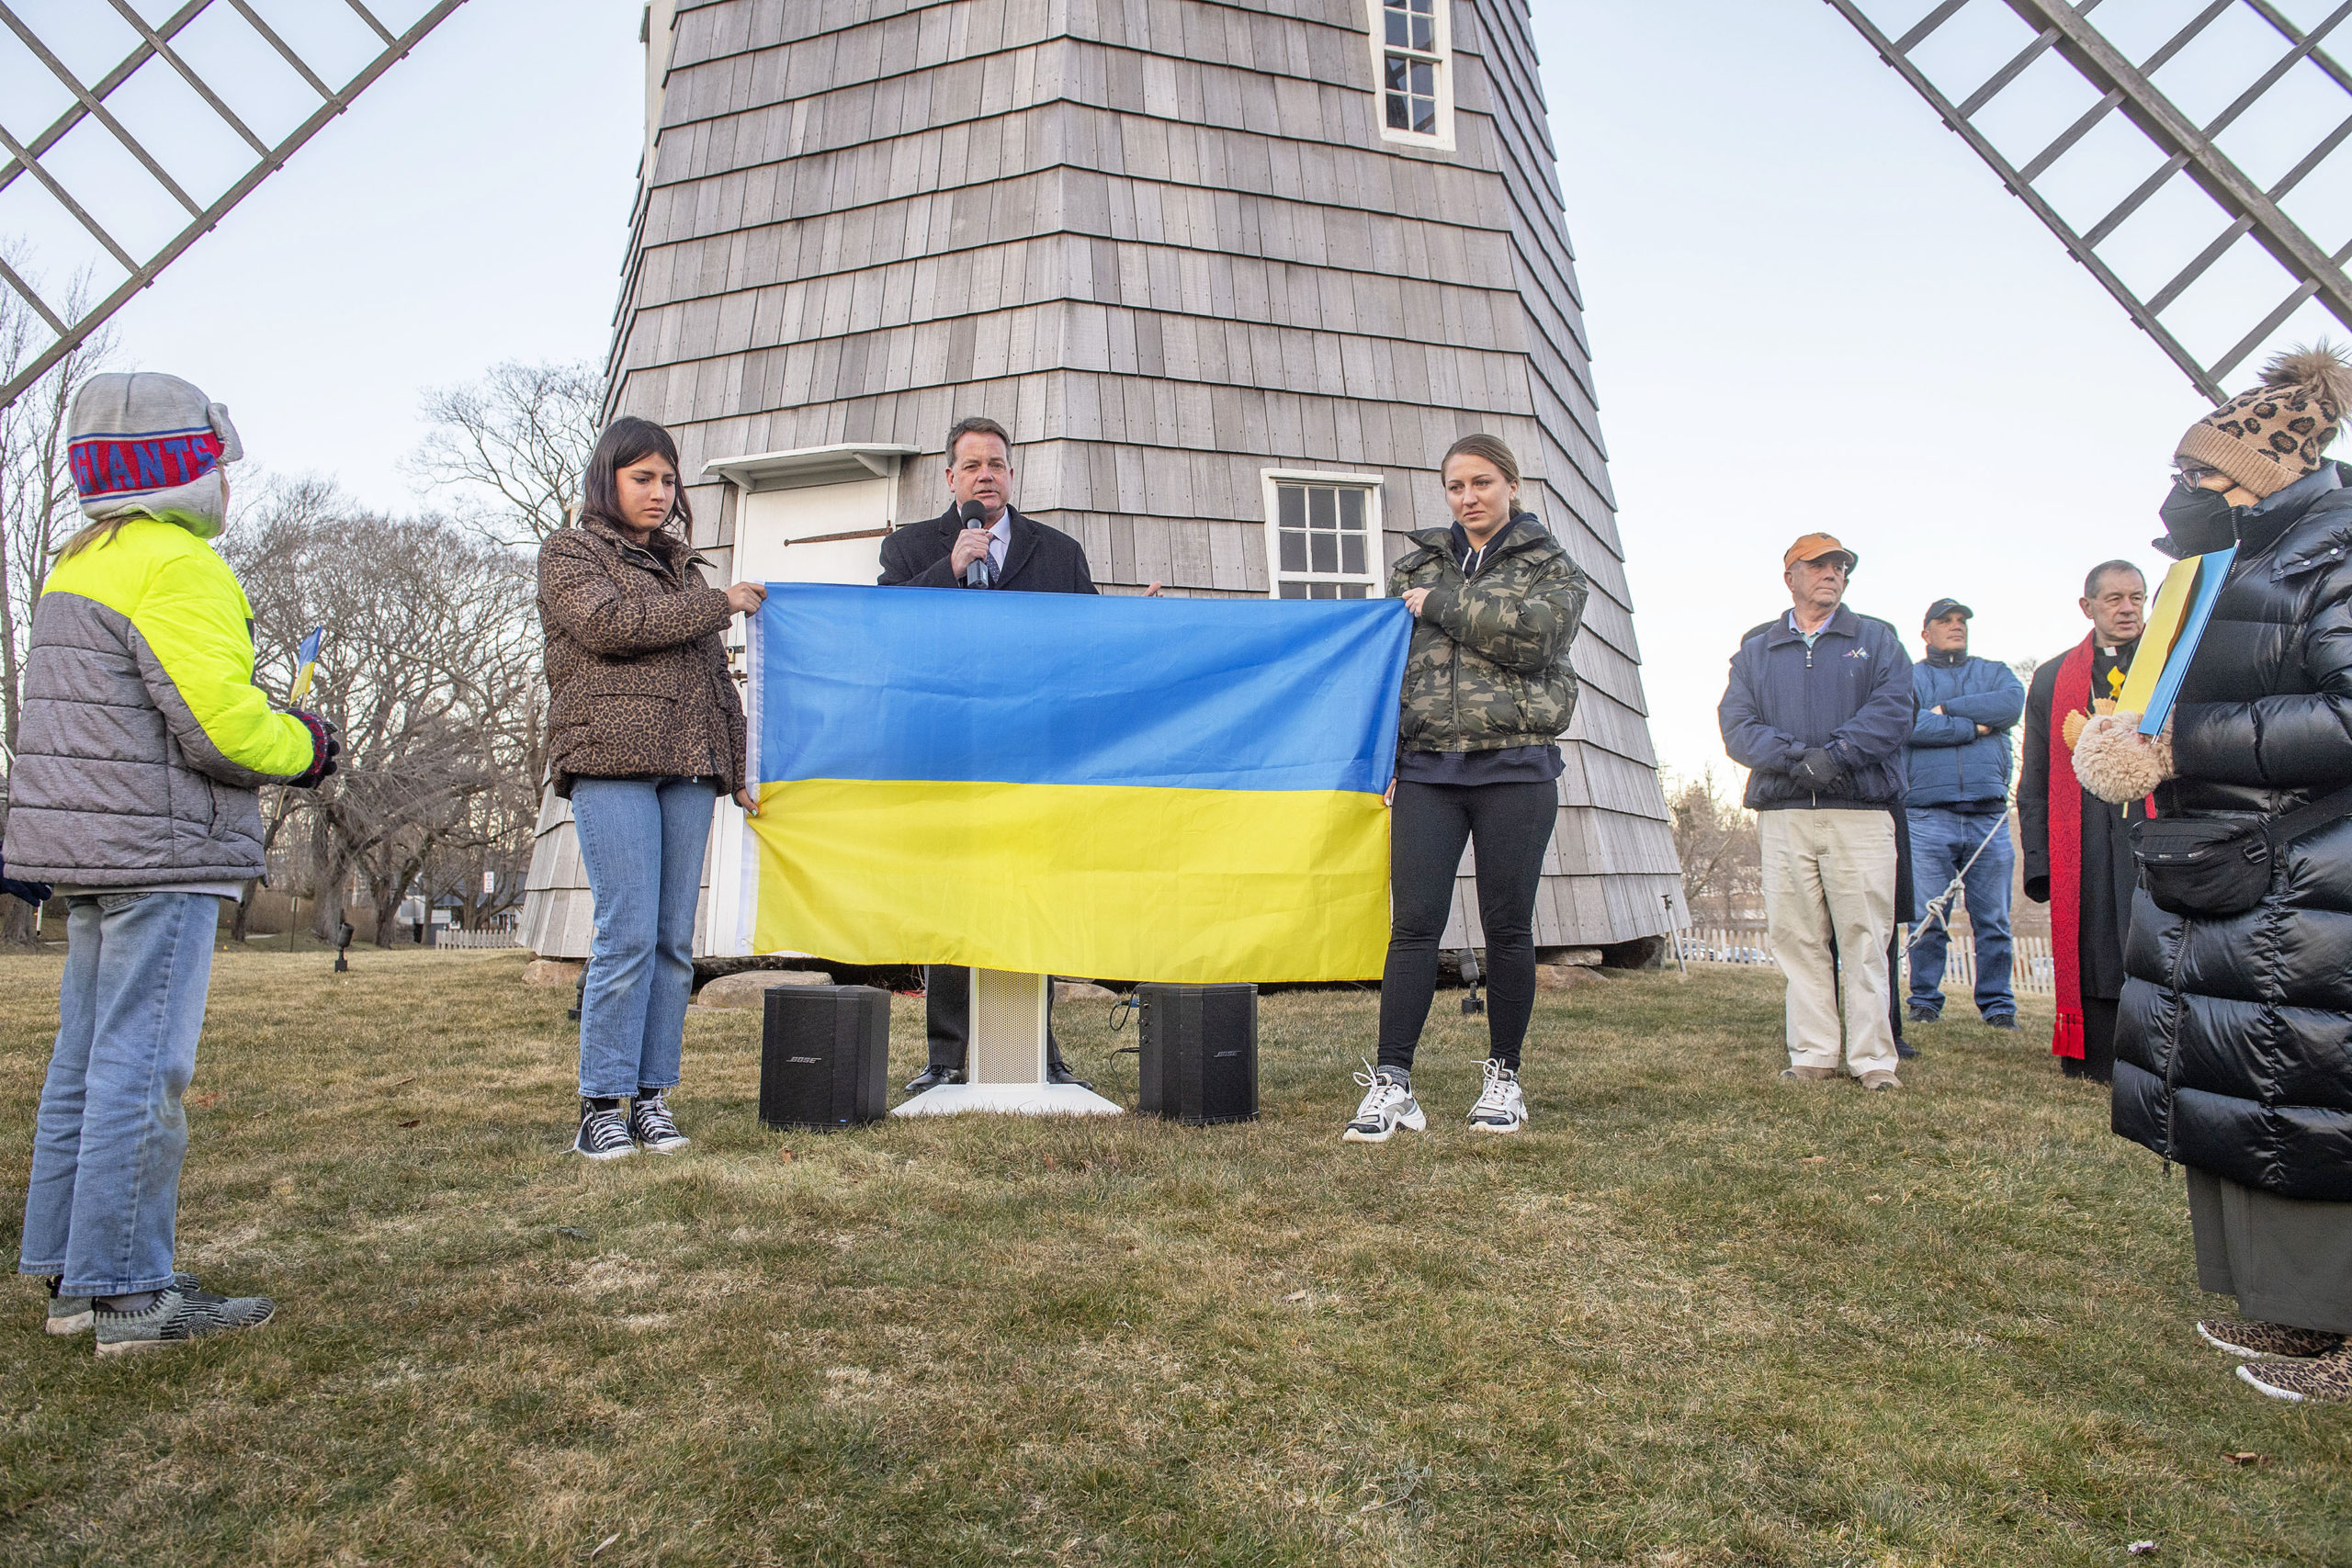 East Hampton Village Mayor Jerry Larsen speaks as Anya Bimson, right, and her daughter, Vira Palamarchuk, whose father is fighting on the front lines in Ukraine, hold up a Ukrainian flag during a rally last Thursday on the Hook Mill Village Green in East Hampton. MICHAEL HELLER